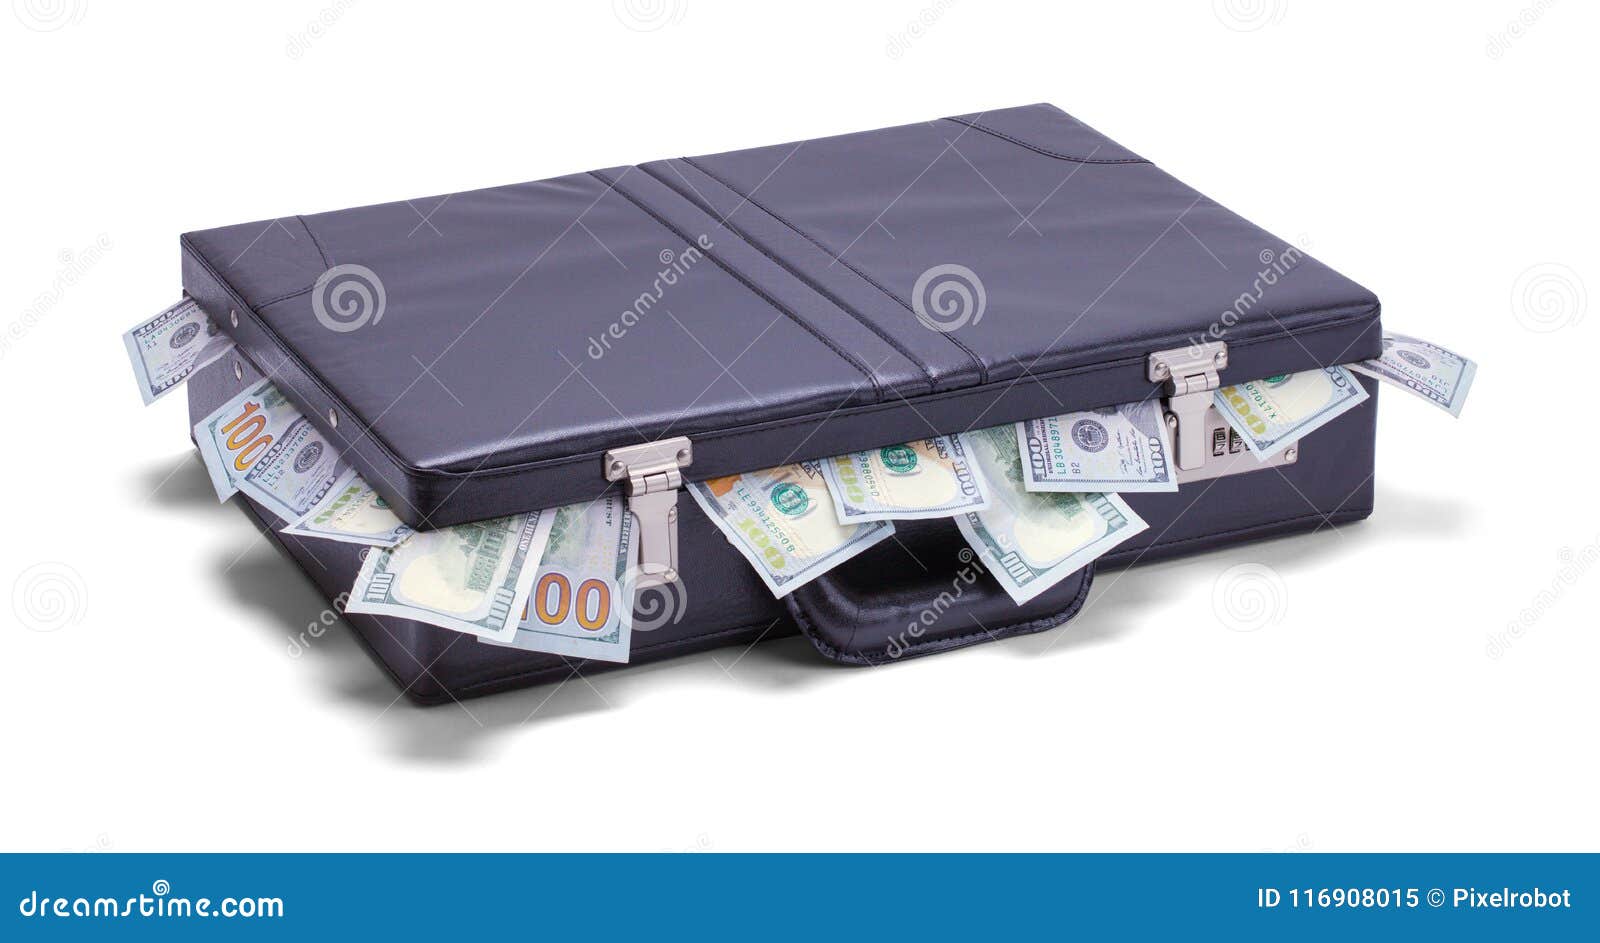 briefcase with money sticking out